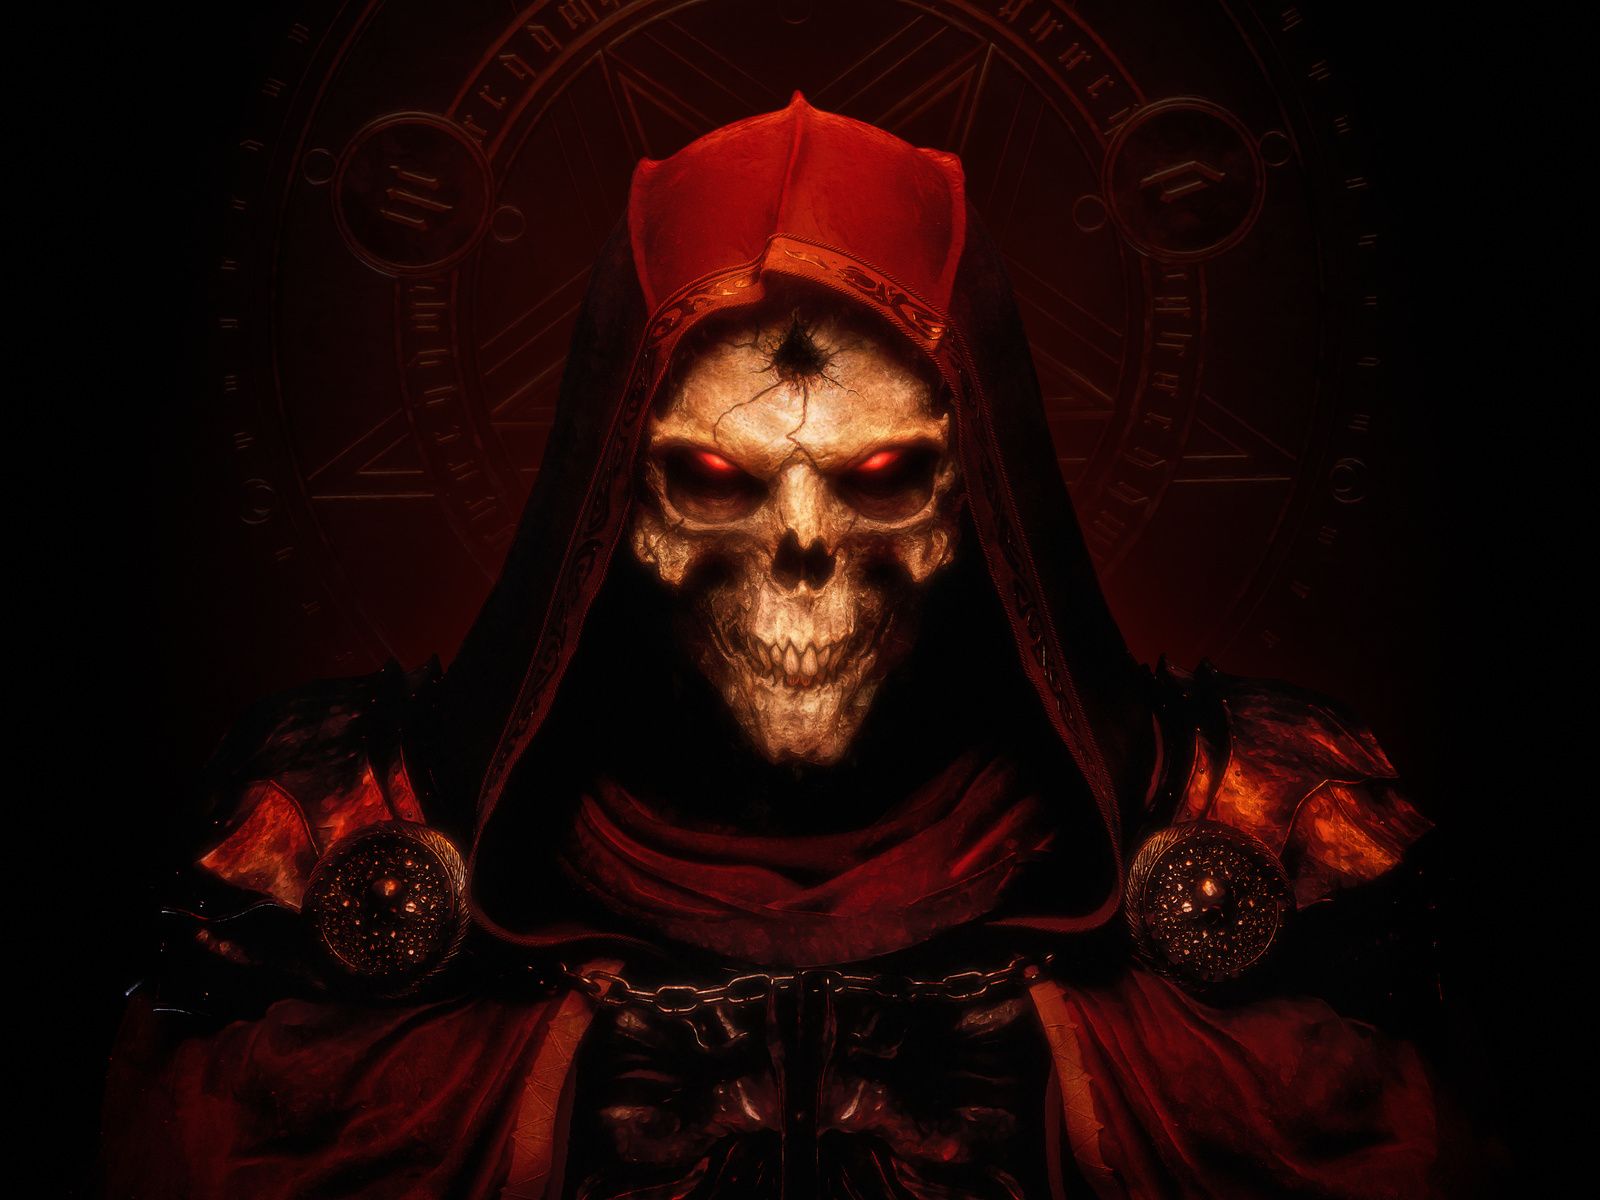 diablo ii resurrected, action role playing video game, blizzard entertainment